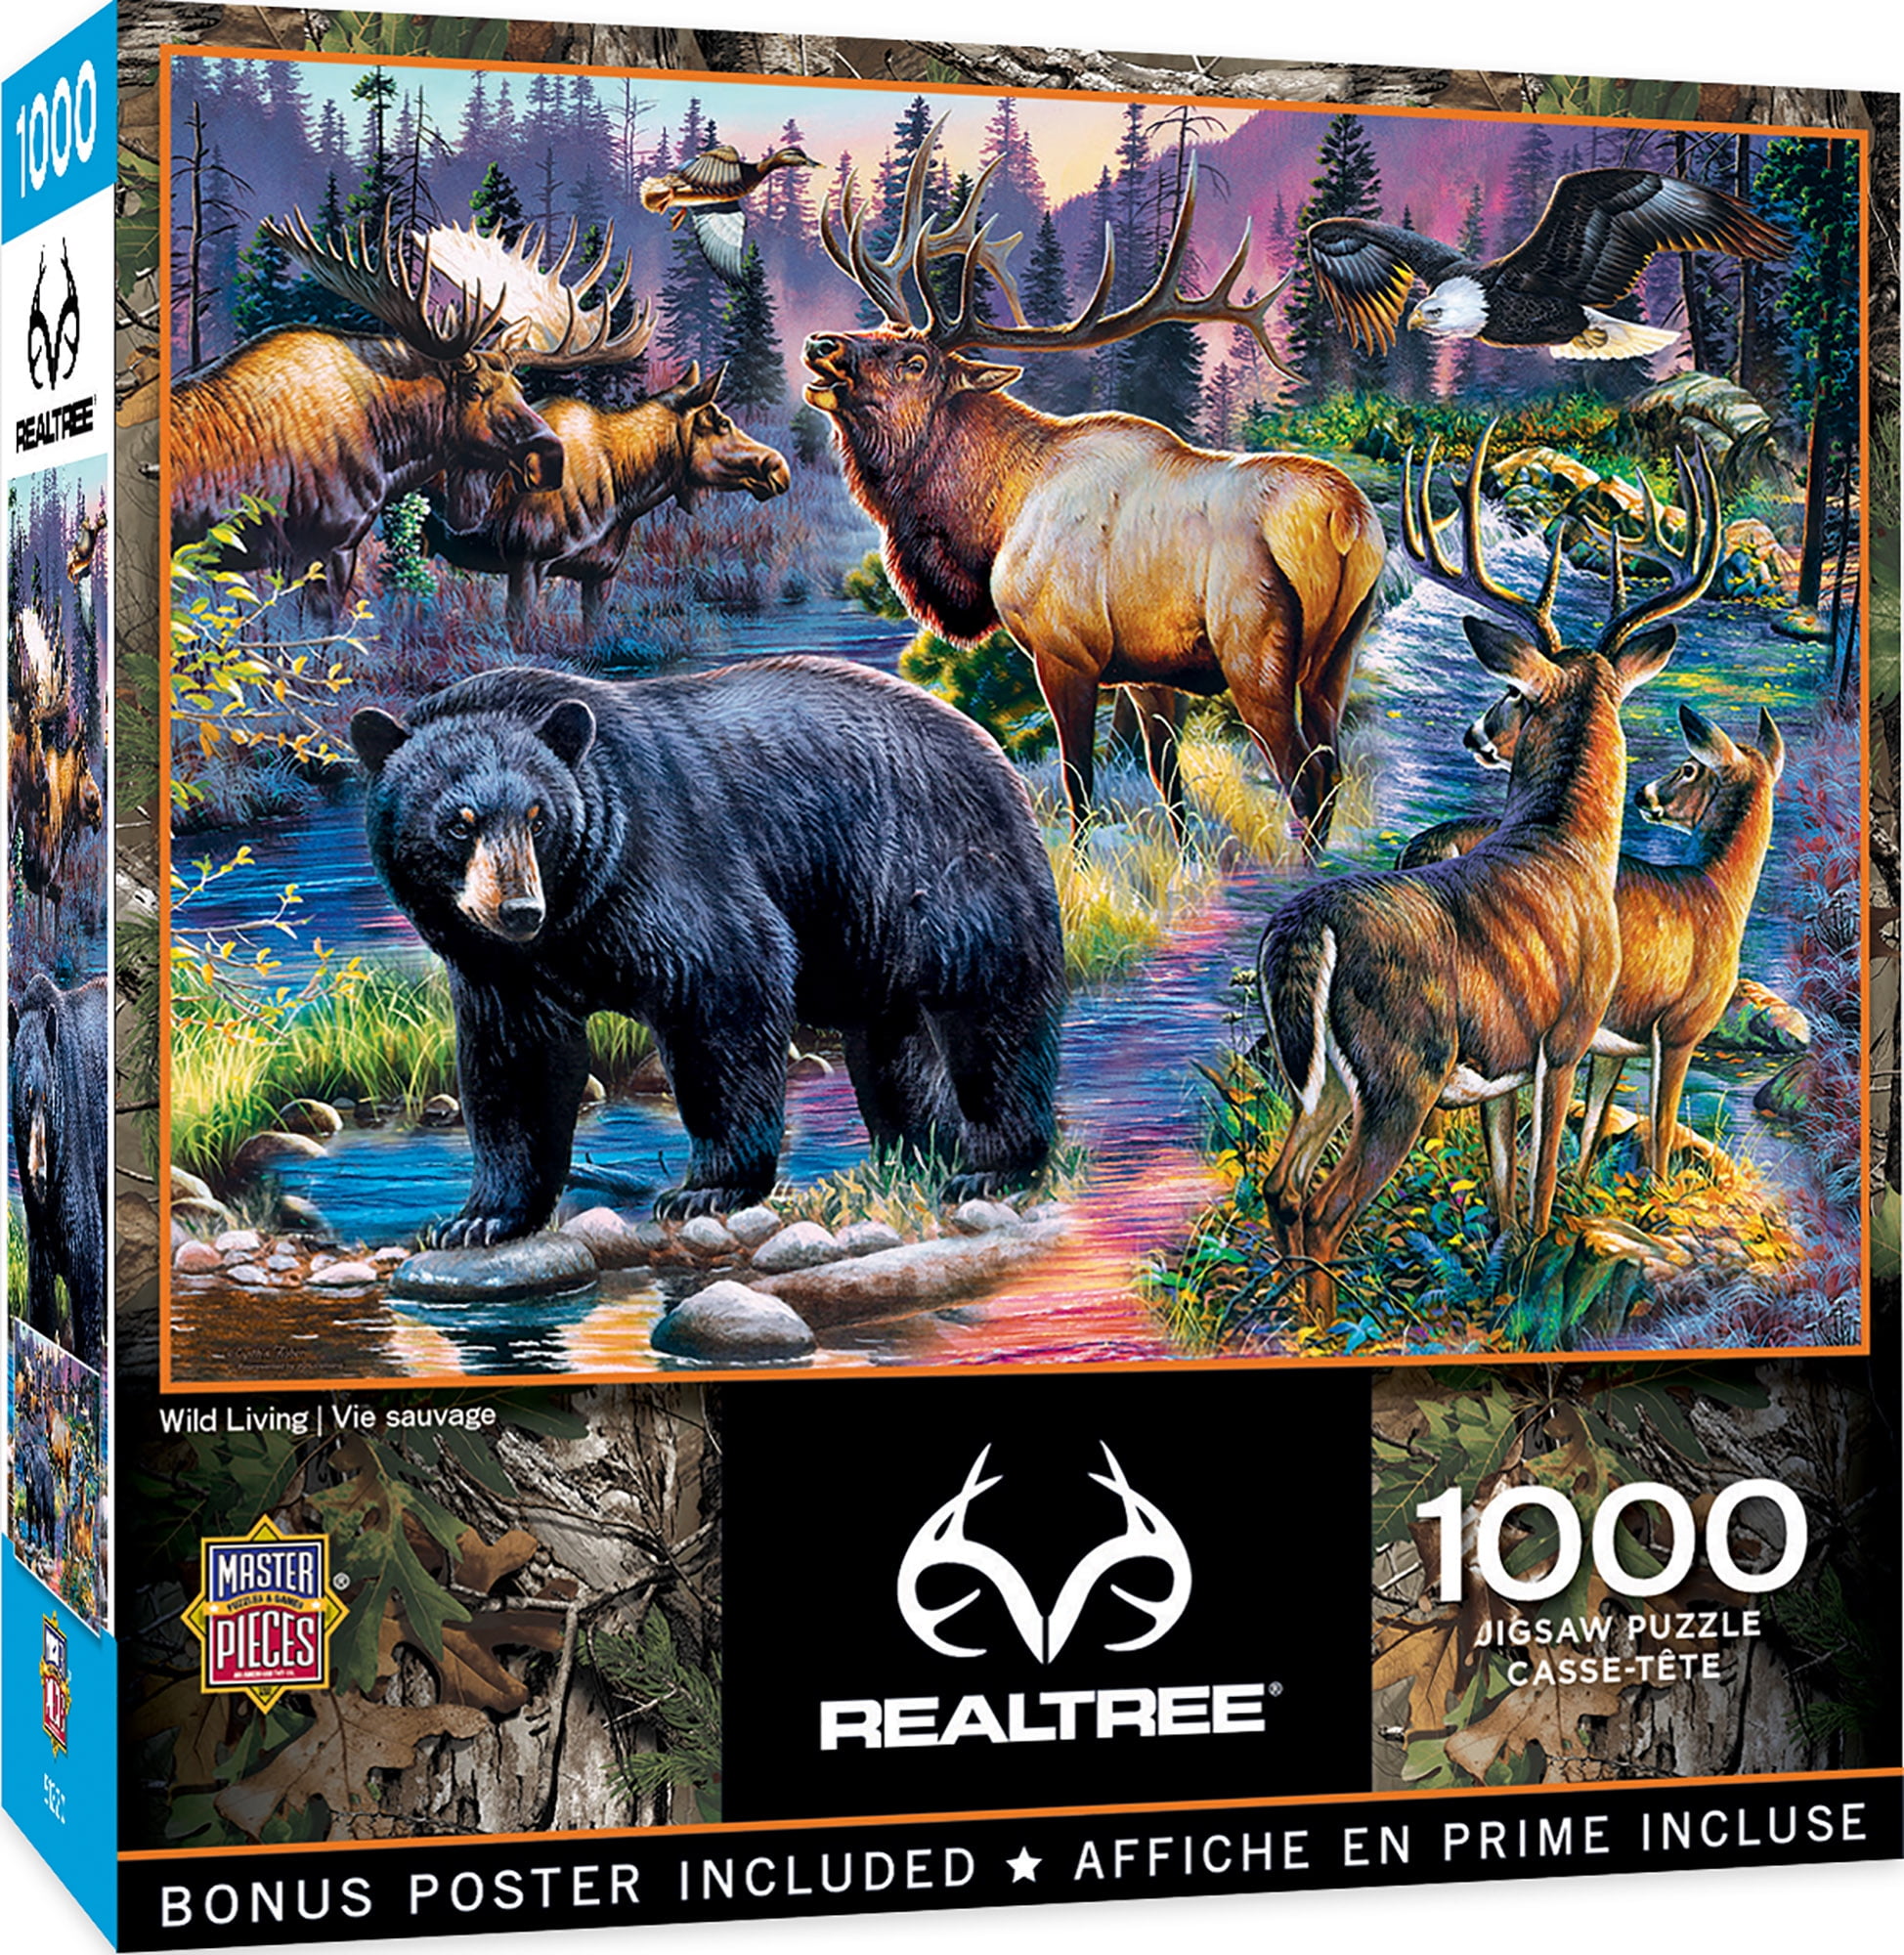 MasterPieces RealTree �The One That Got Away� 1000 Piece Jigsaw Puzzle W/Poster 705988720703